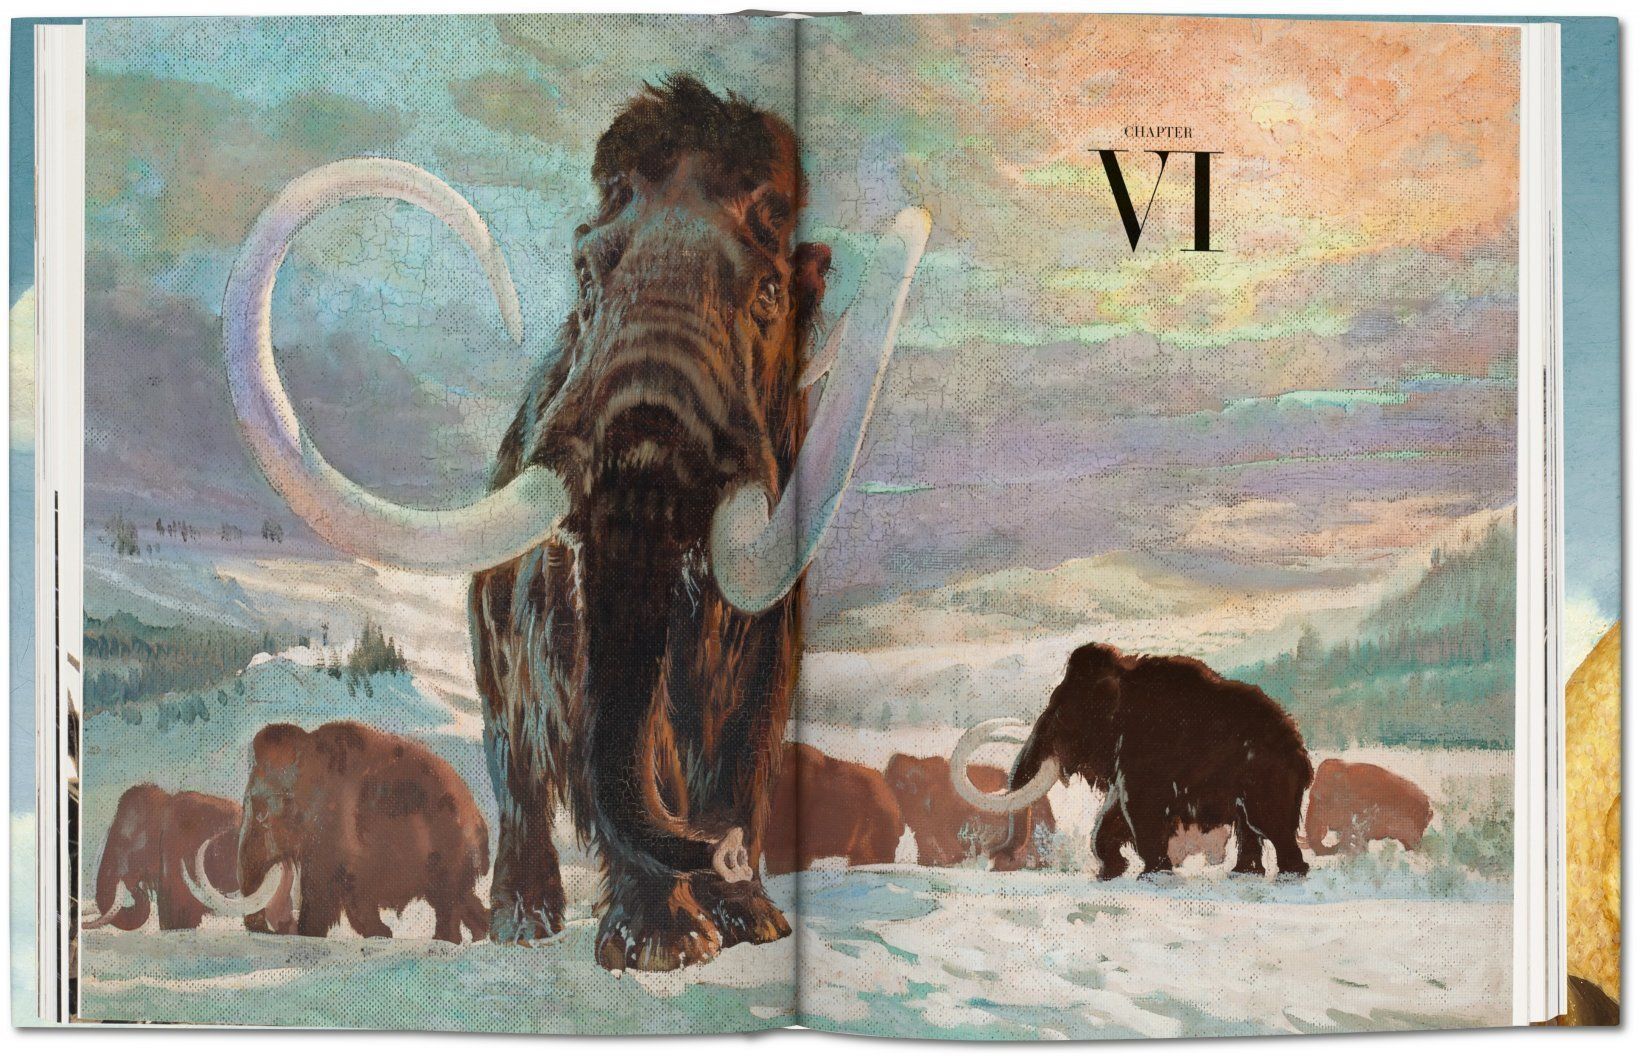 Paleoart: Visions of the Historic Past - Sample Art